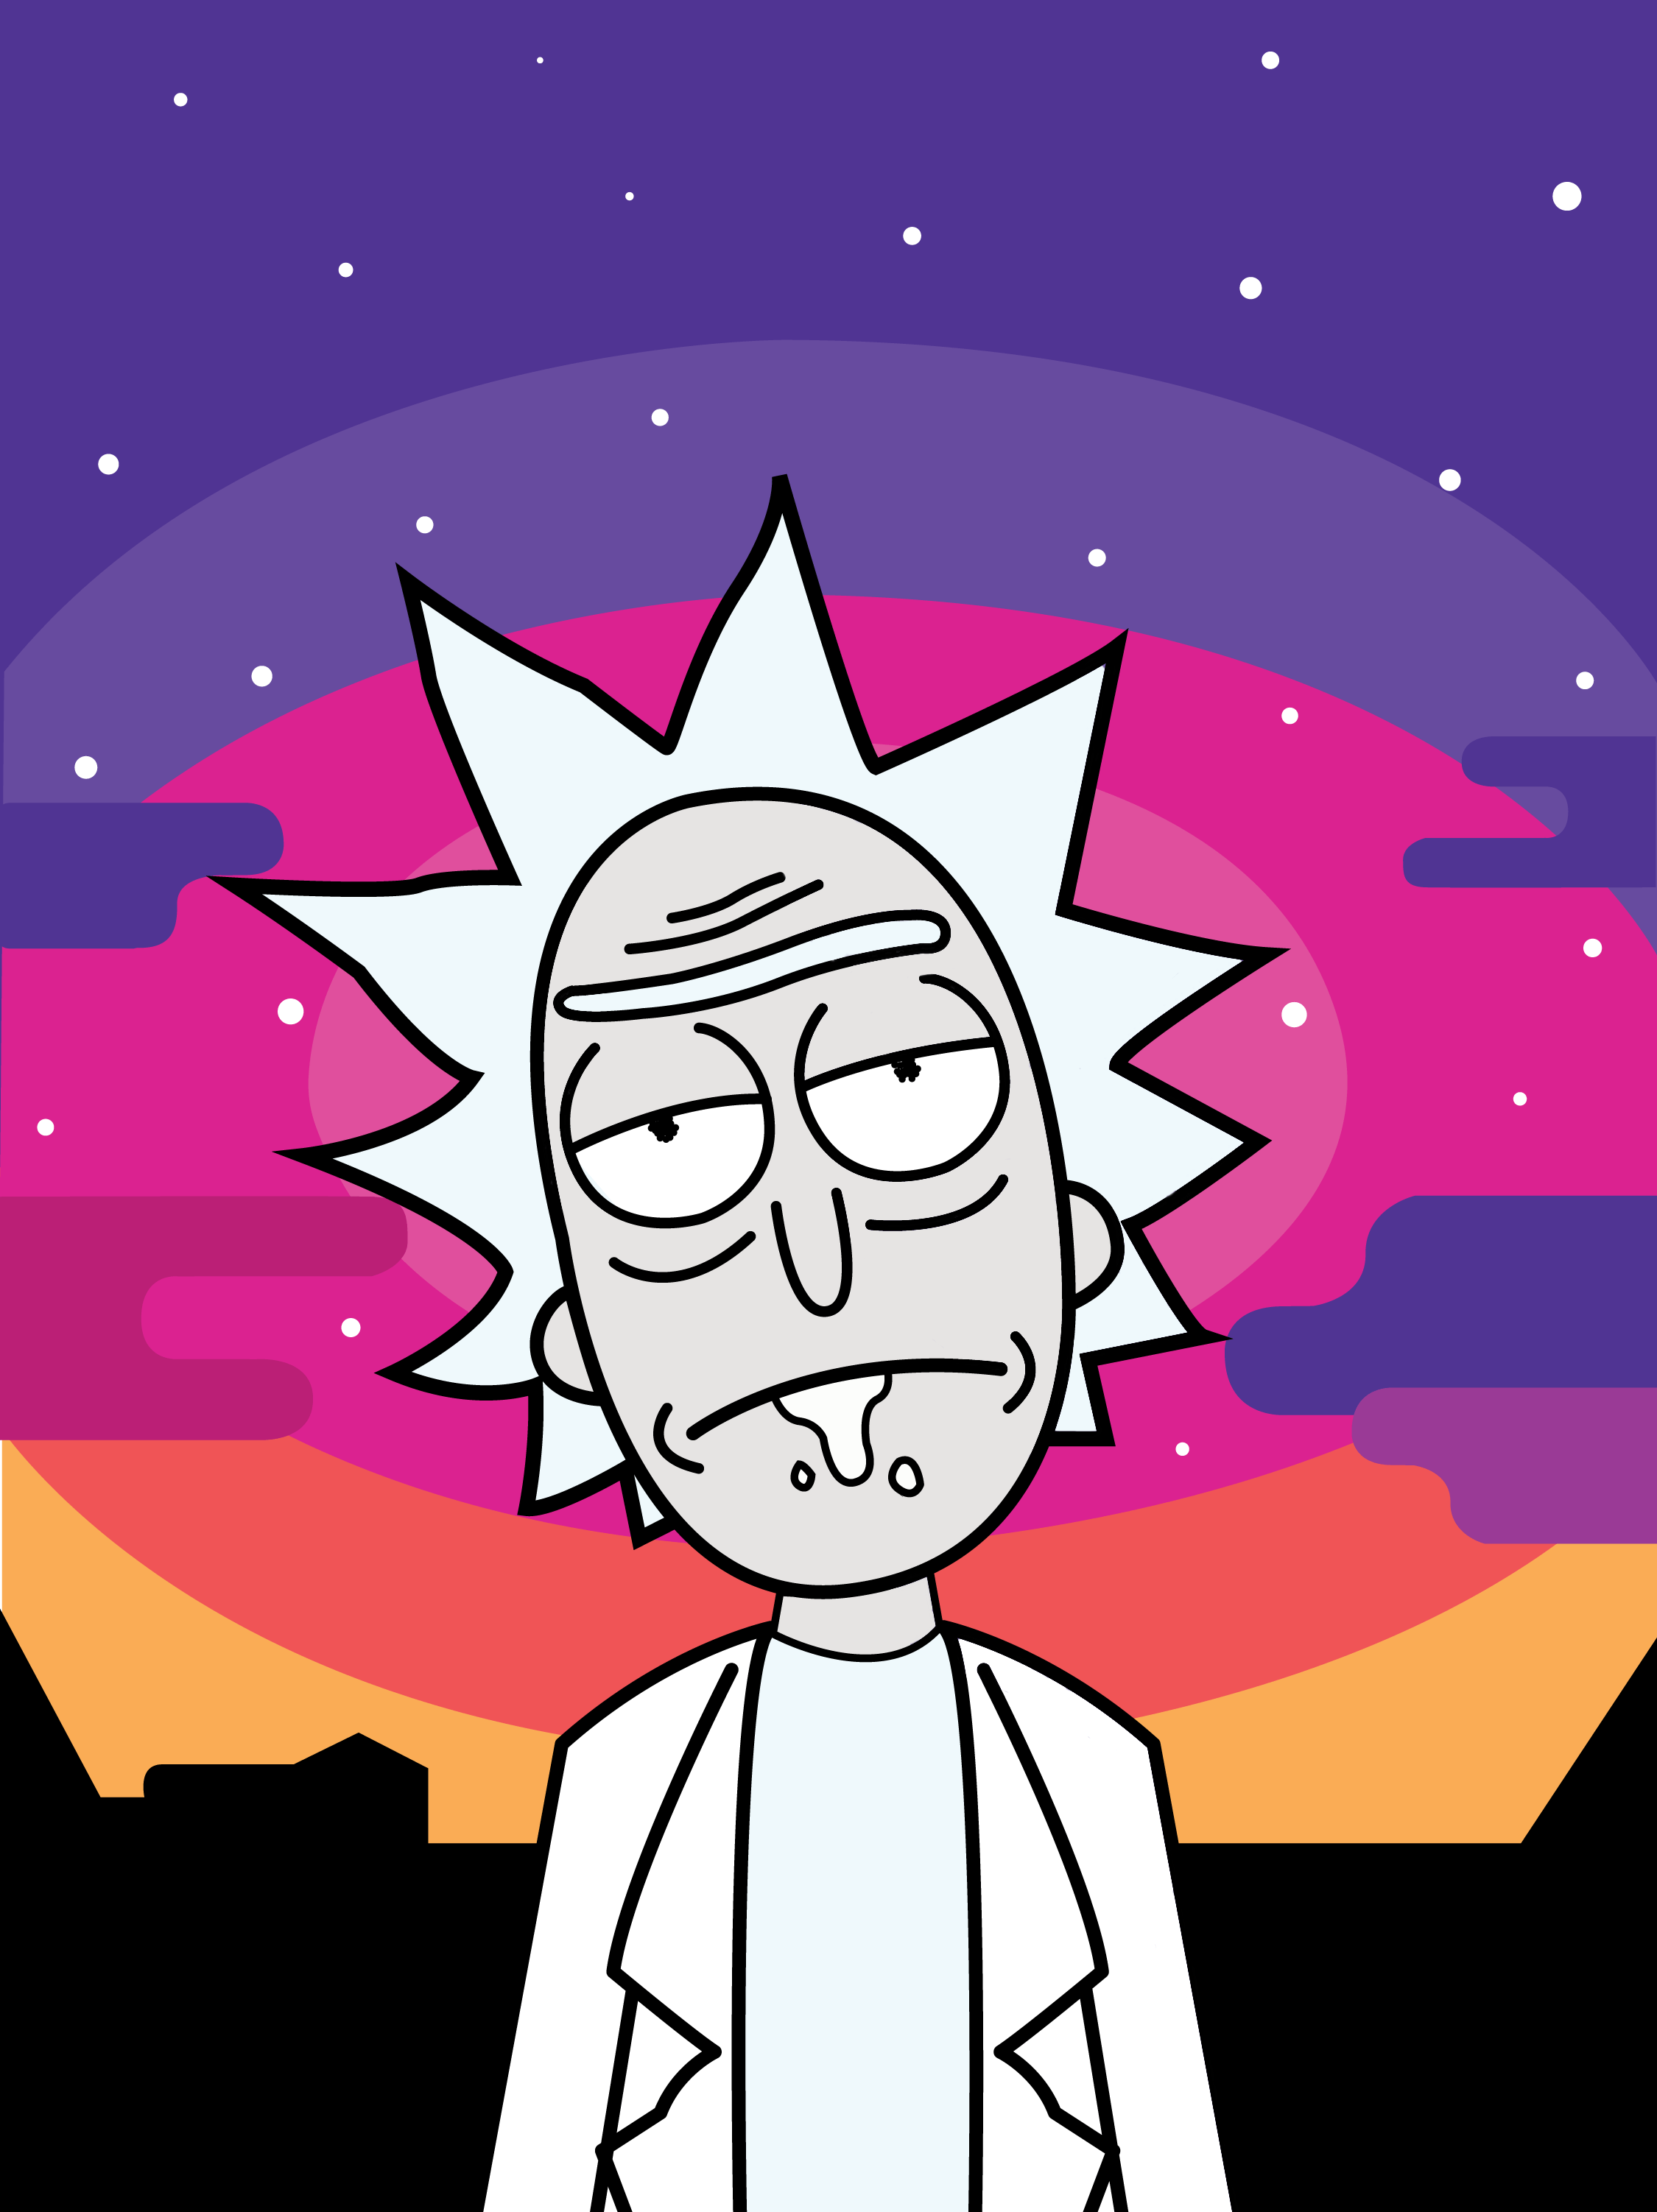 Download Mobile Rick And Morty Wallpaper